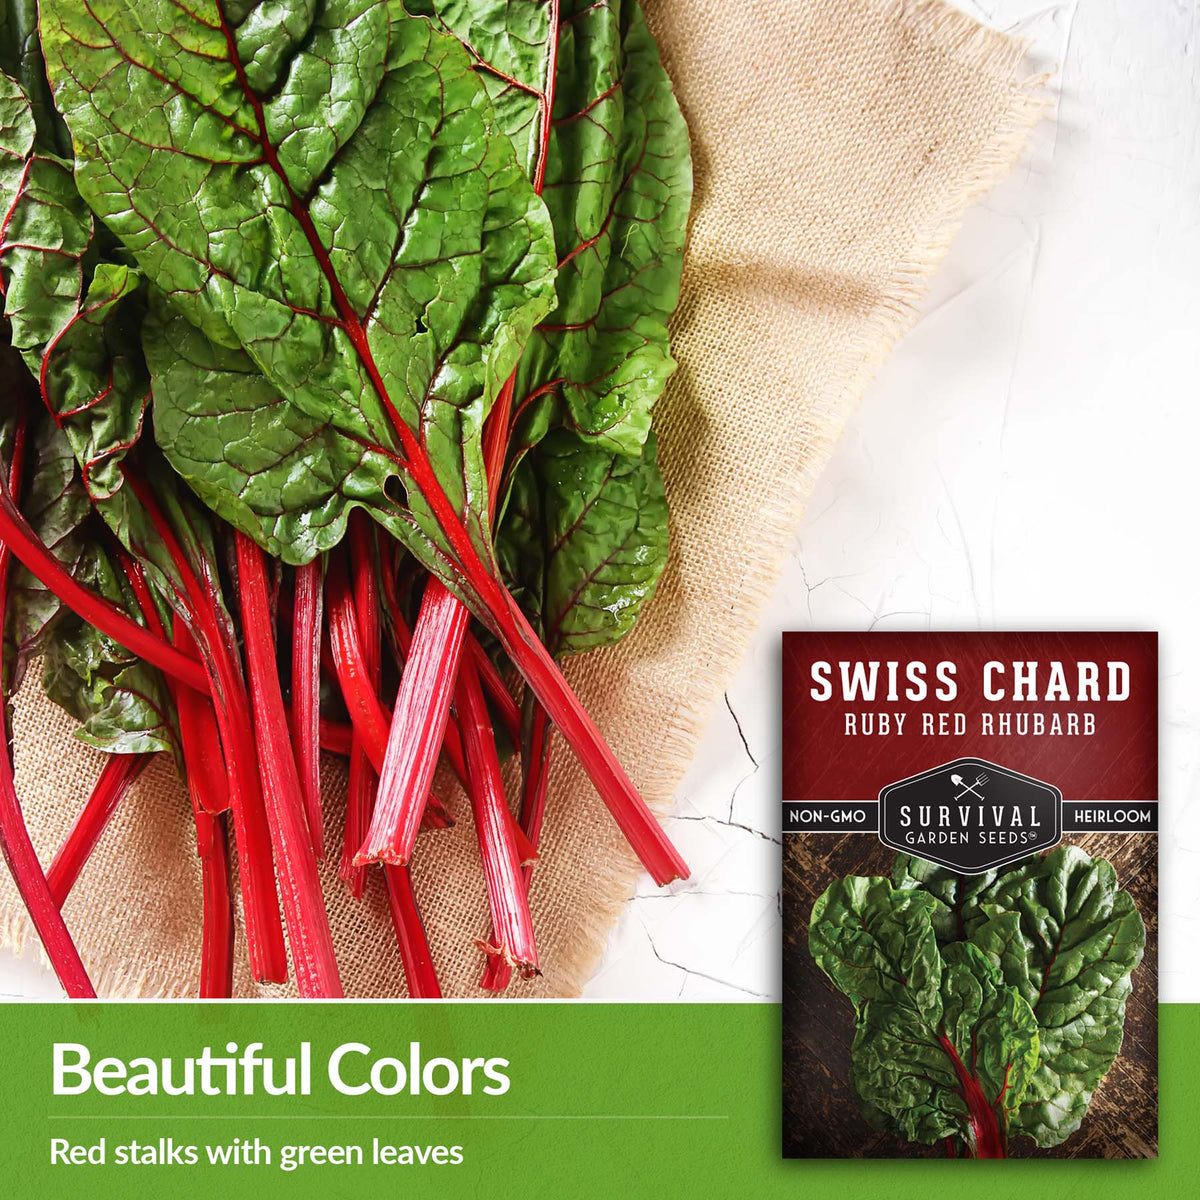 Ruby Red Rhubarb Swiss chard has red stalks with green leaves